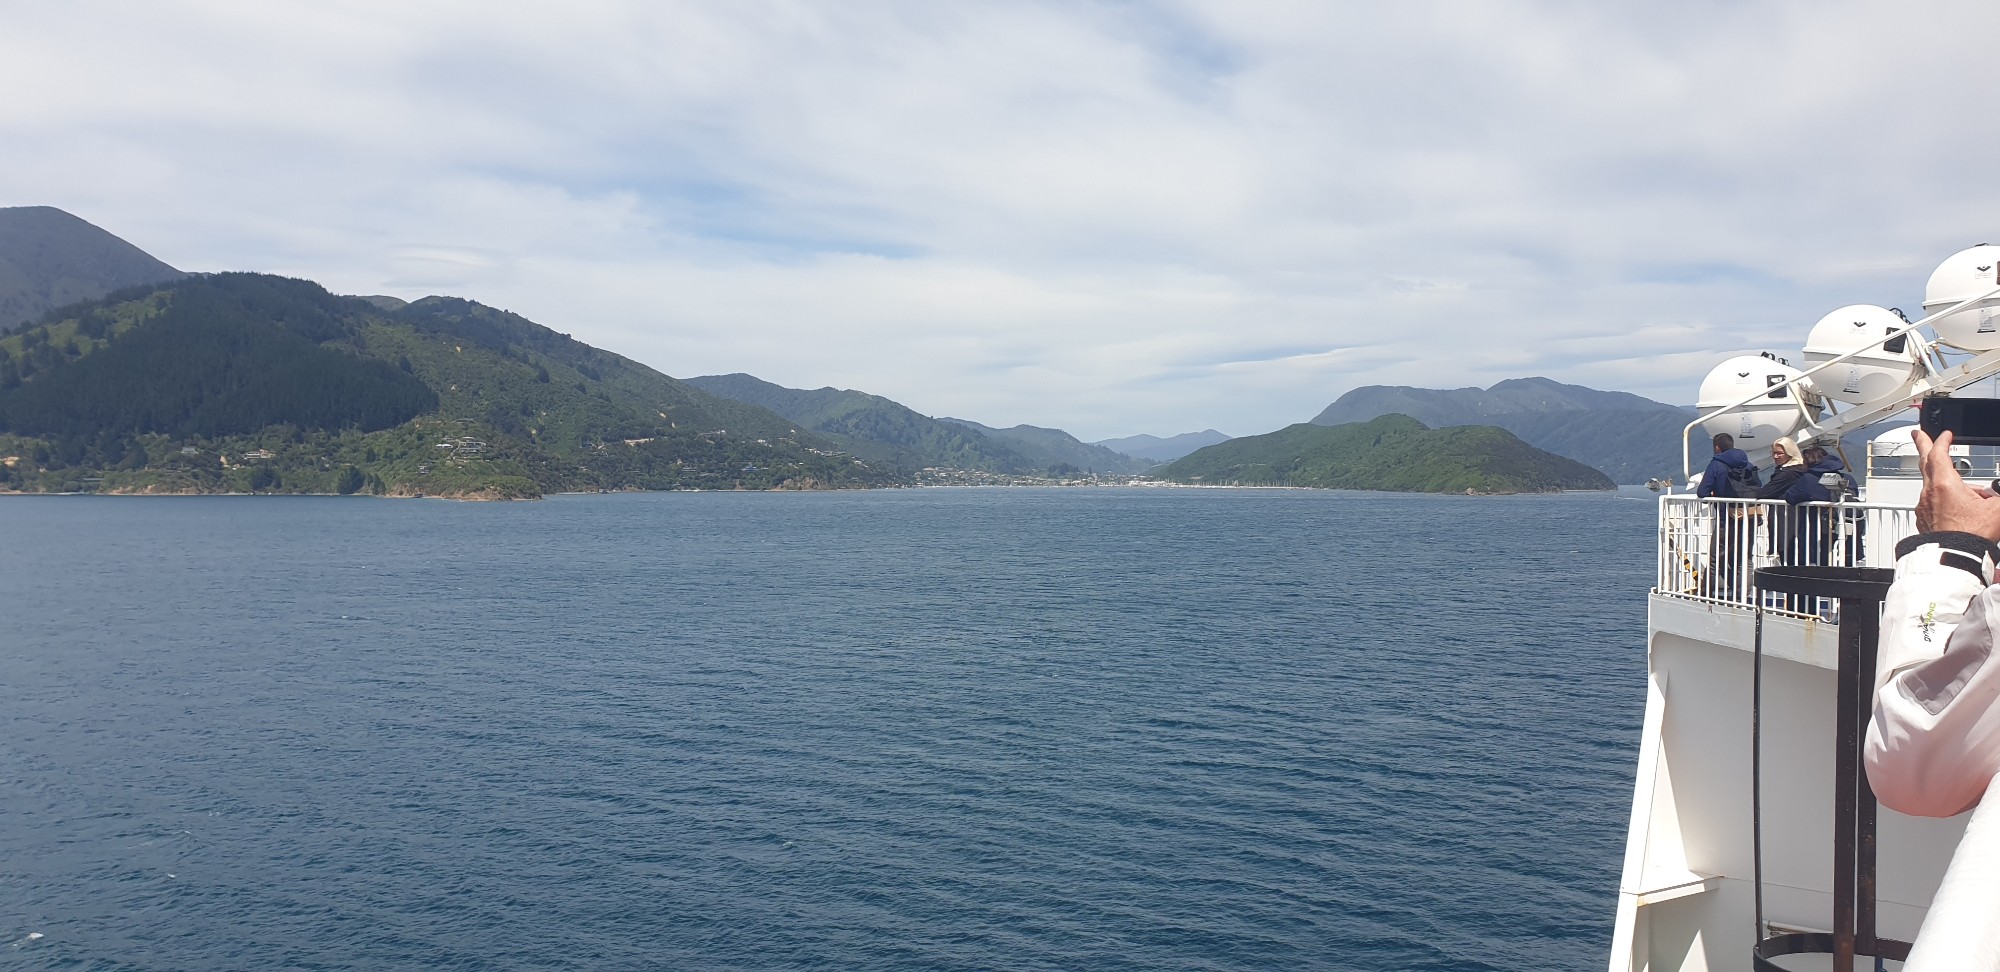 Arrival In Picton by Kate